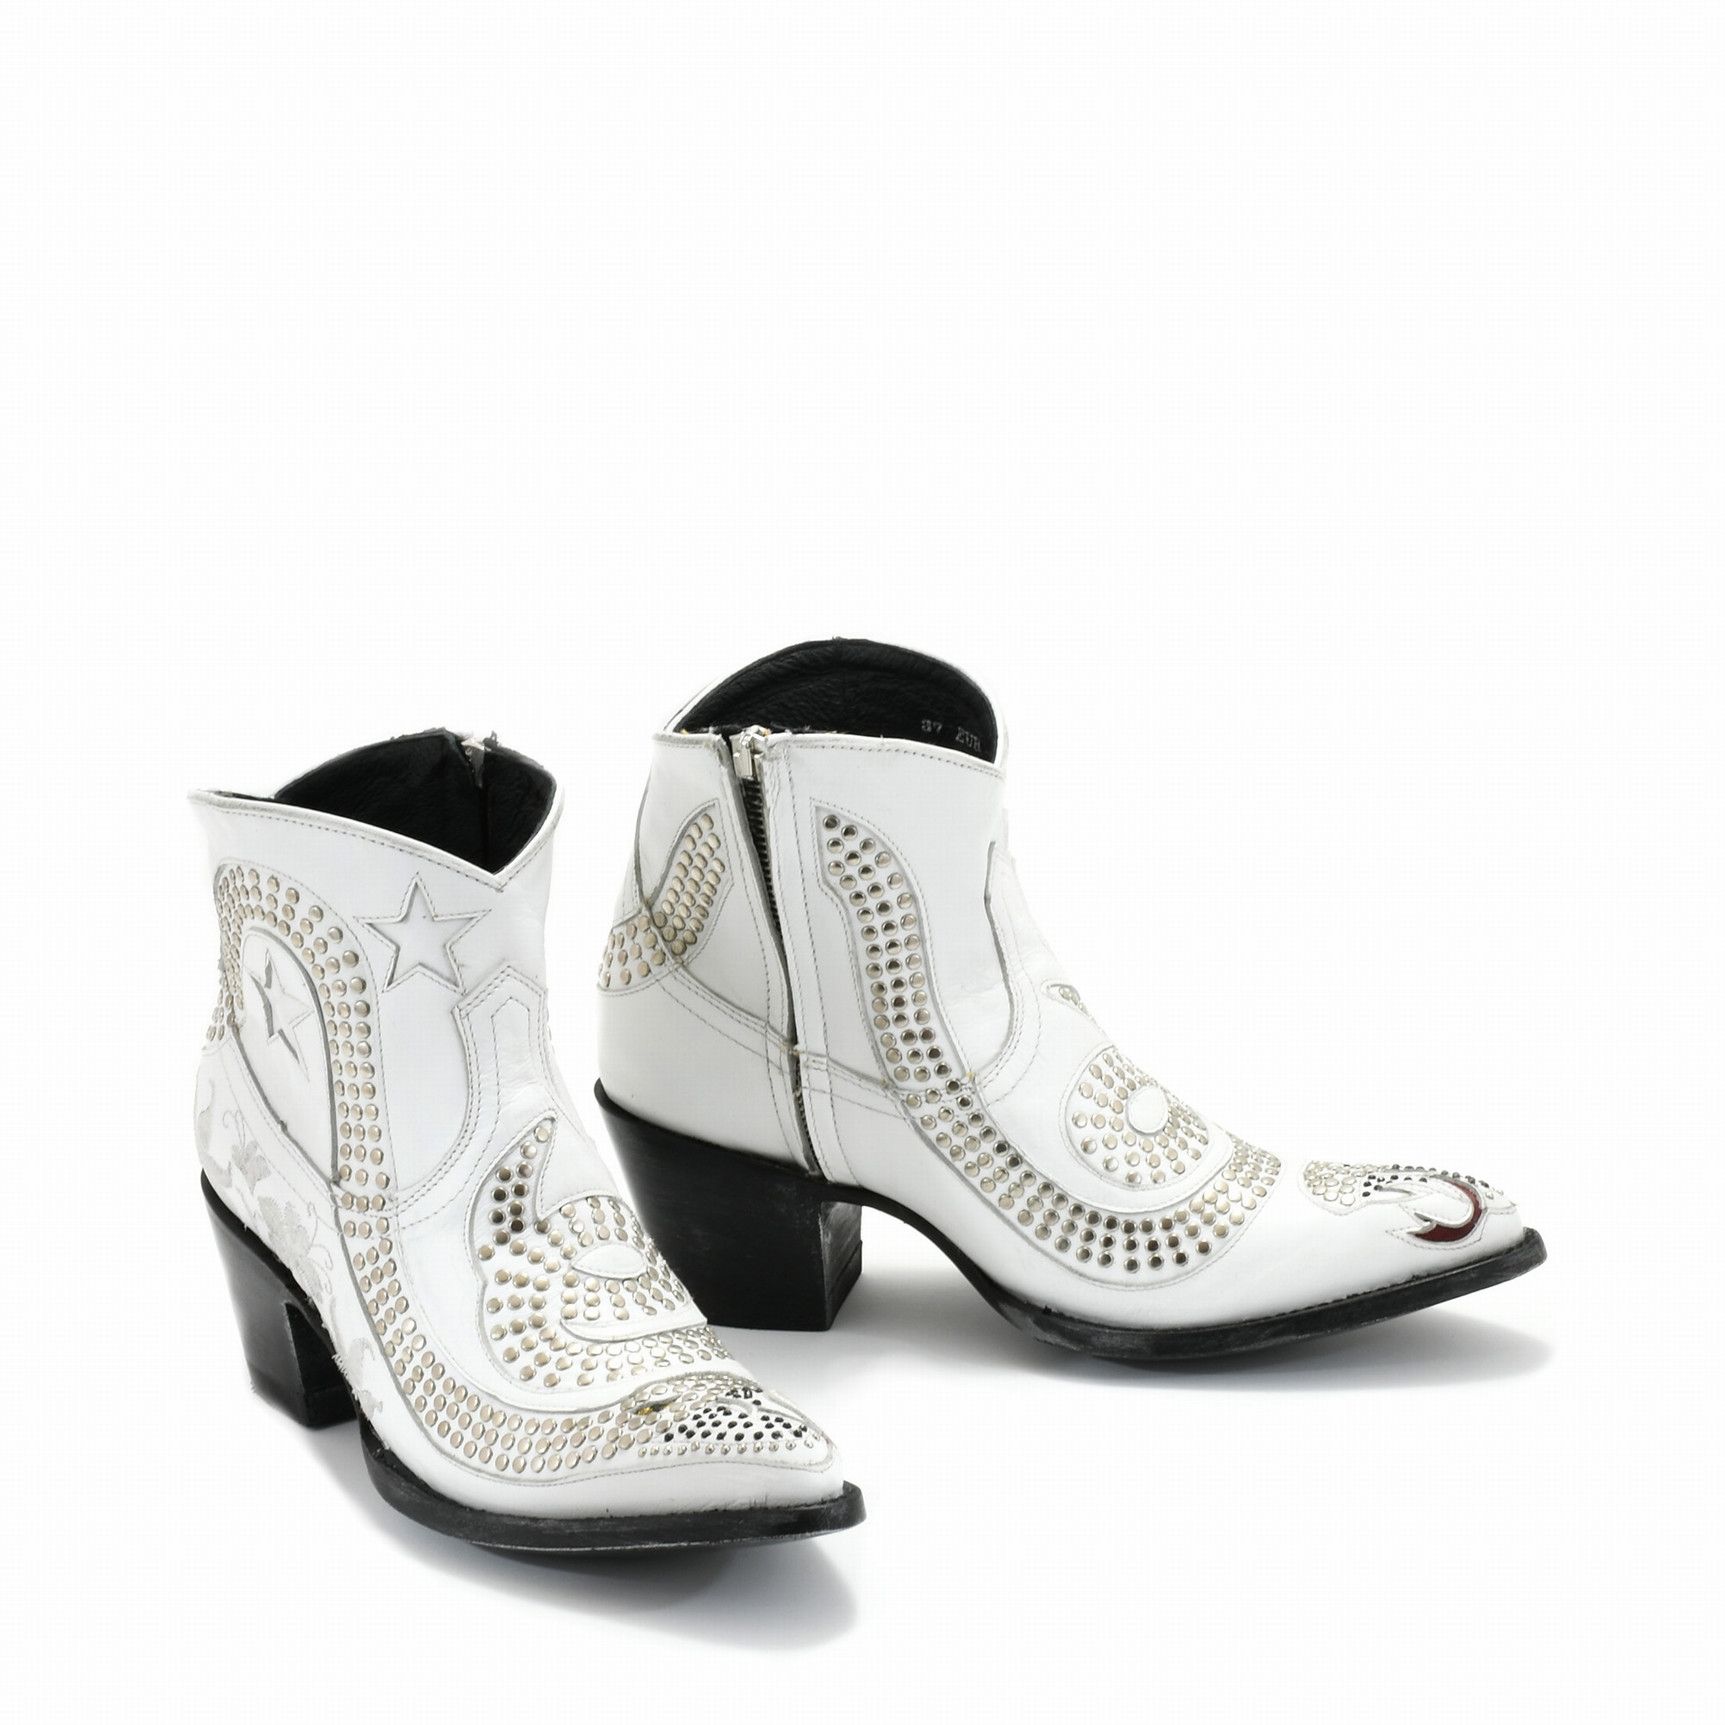 CORIUS SNAKE 6 WHITE POINTED TOE ANKLE BOOTS WITH STUDS  AND SNAKE OUTCUTS   Total heel height 2.6 Inches  100% cow leather  Col